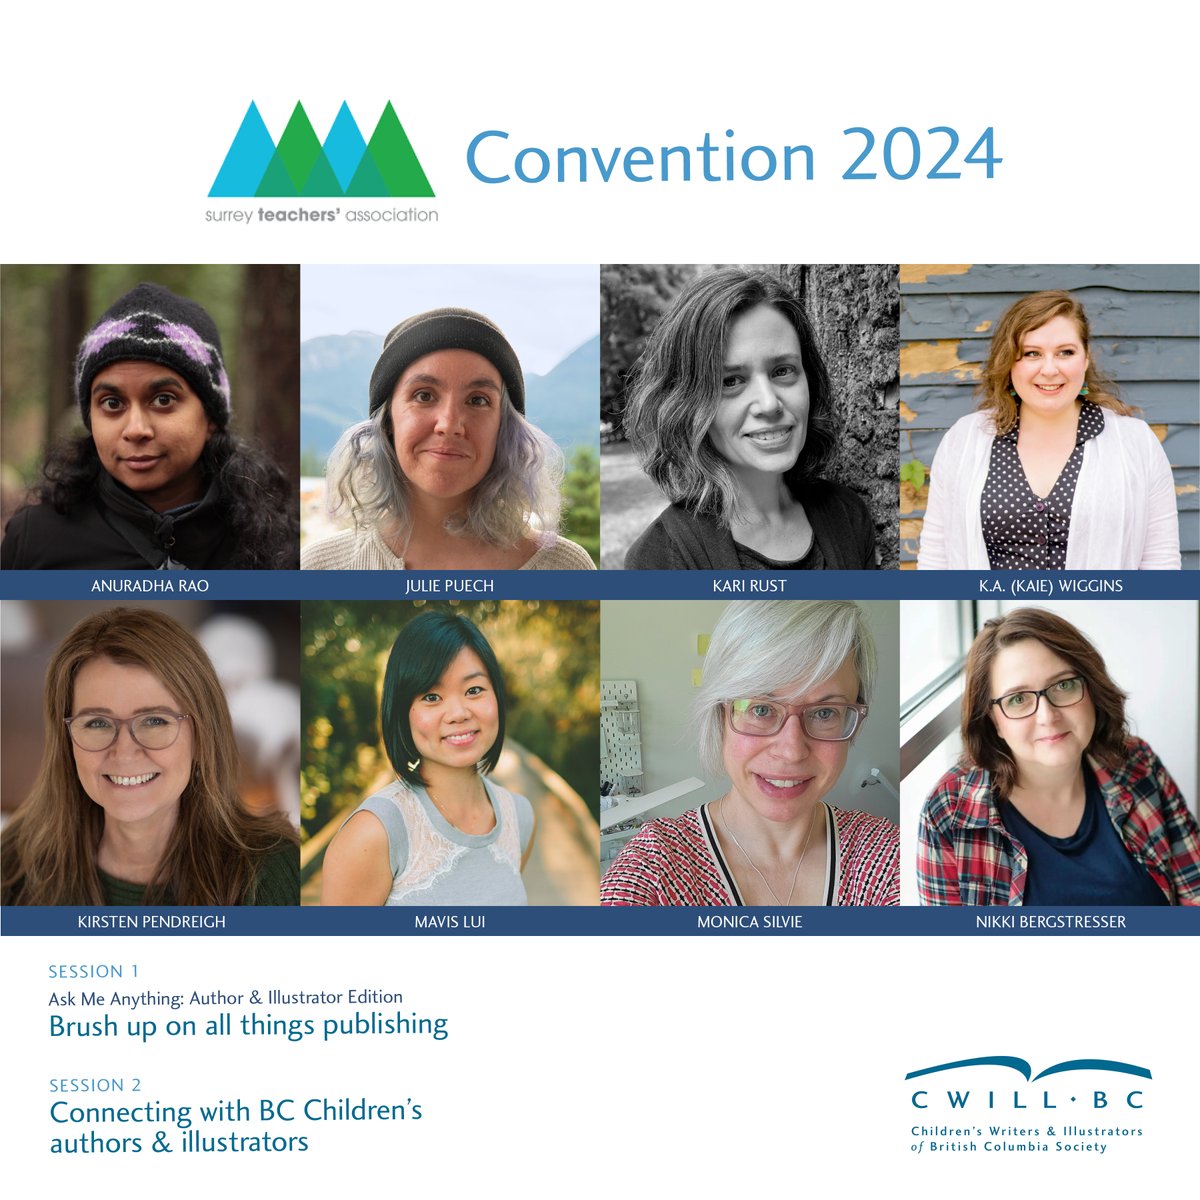 We're proud to have been invited to speak at the Surrey Teachers' Association annual conference. We're bringing our talented author and illustrators to speak at two different sessions. Can't wait to connect with Surrey educators!